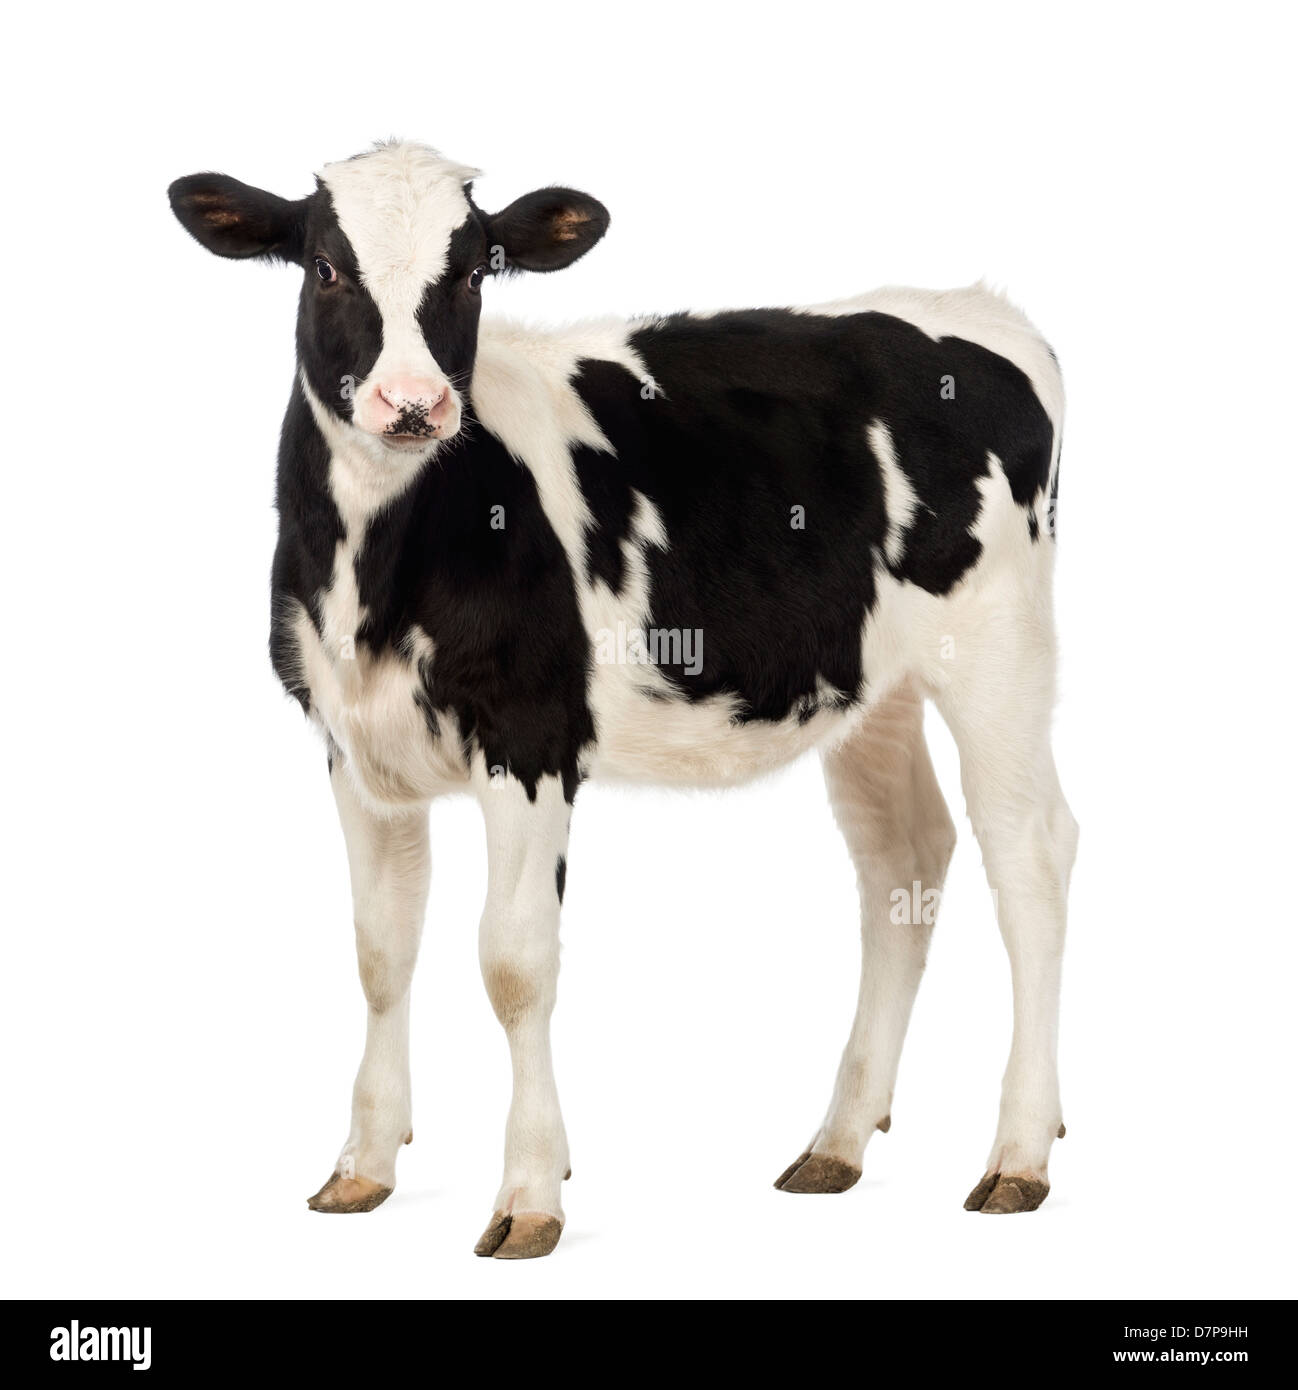 Veal calf, 8 months old, in front of white background Stock Photo